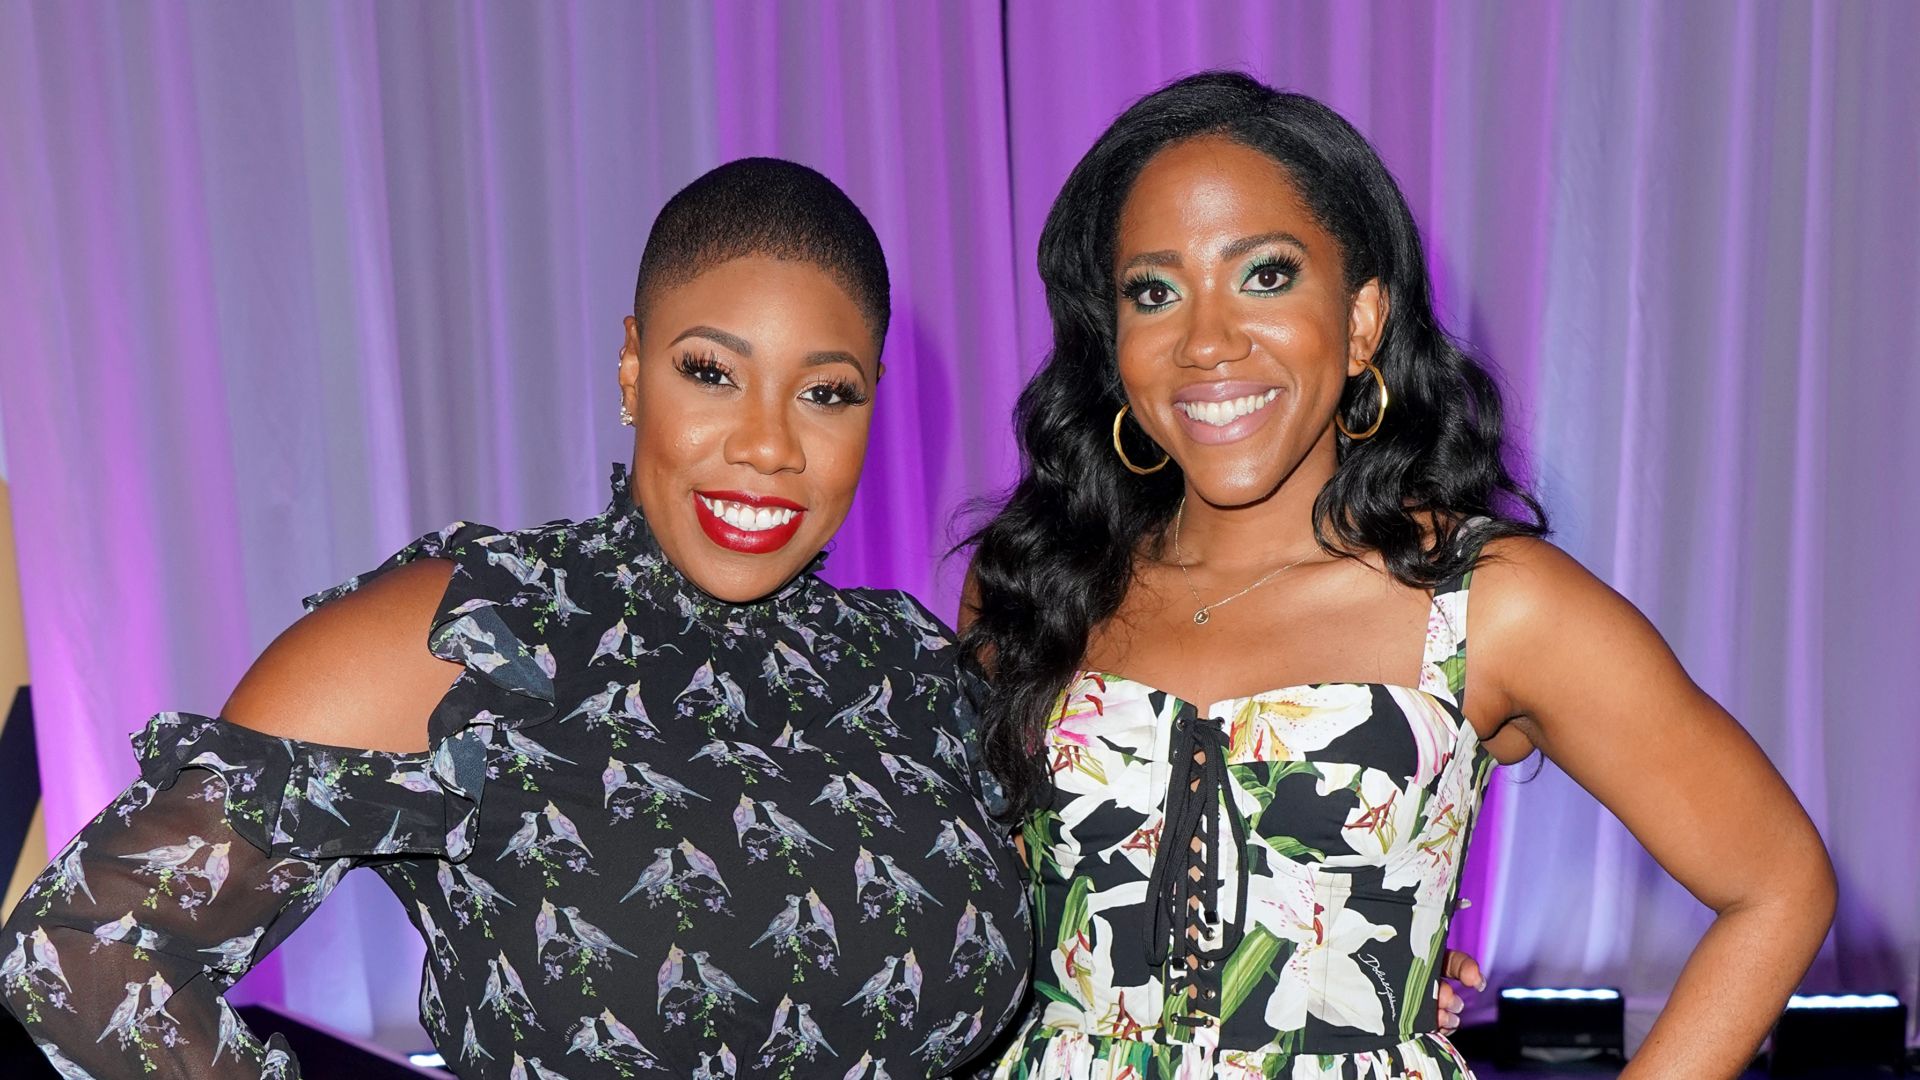 With ColorComm, Women Of Color Experience The True Power Of Networking